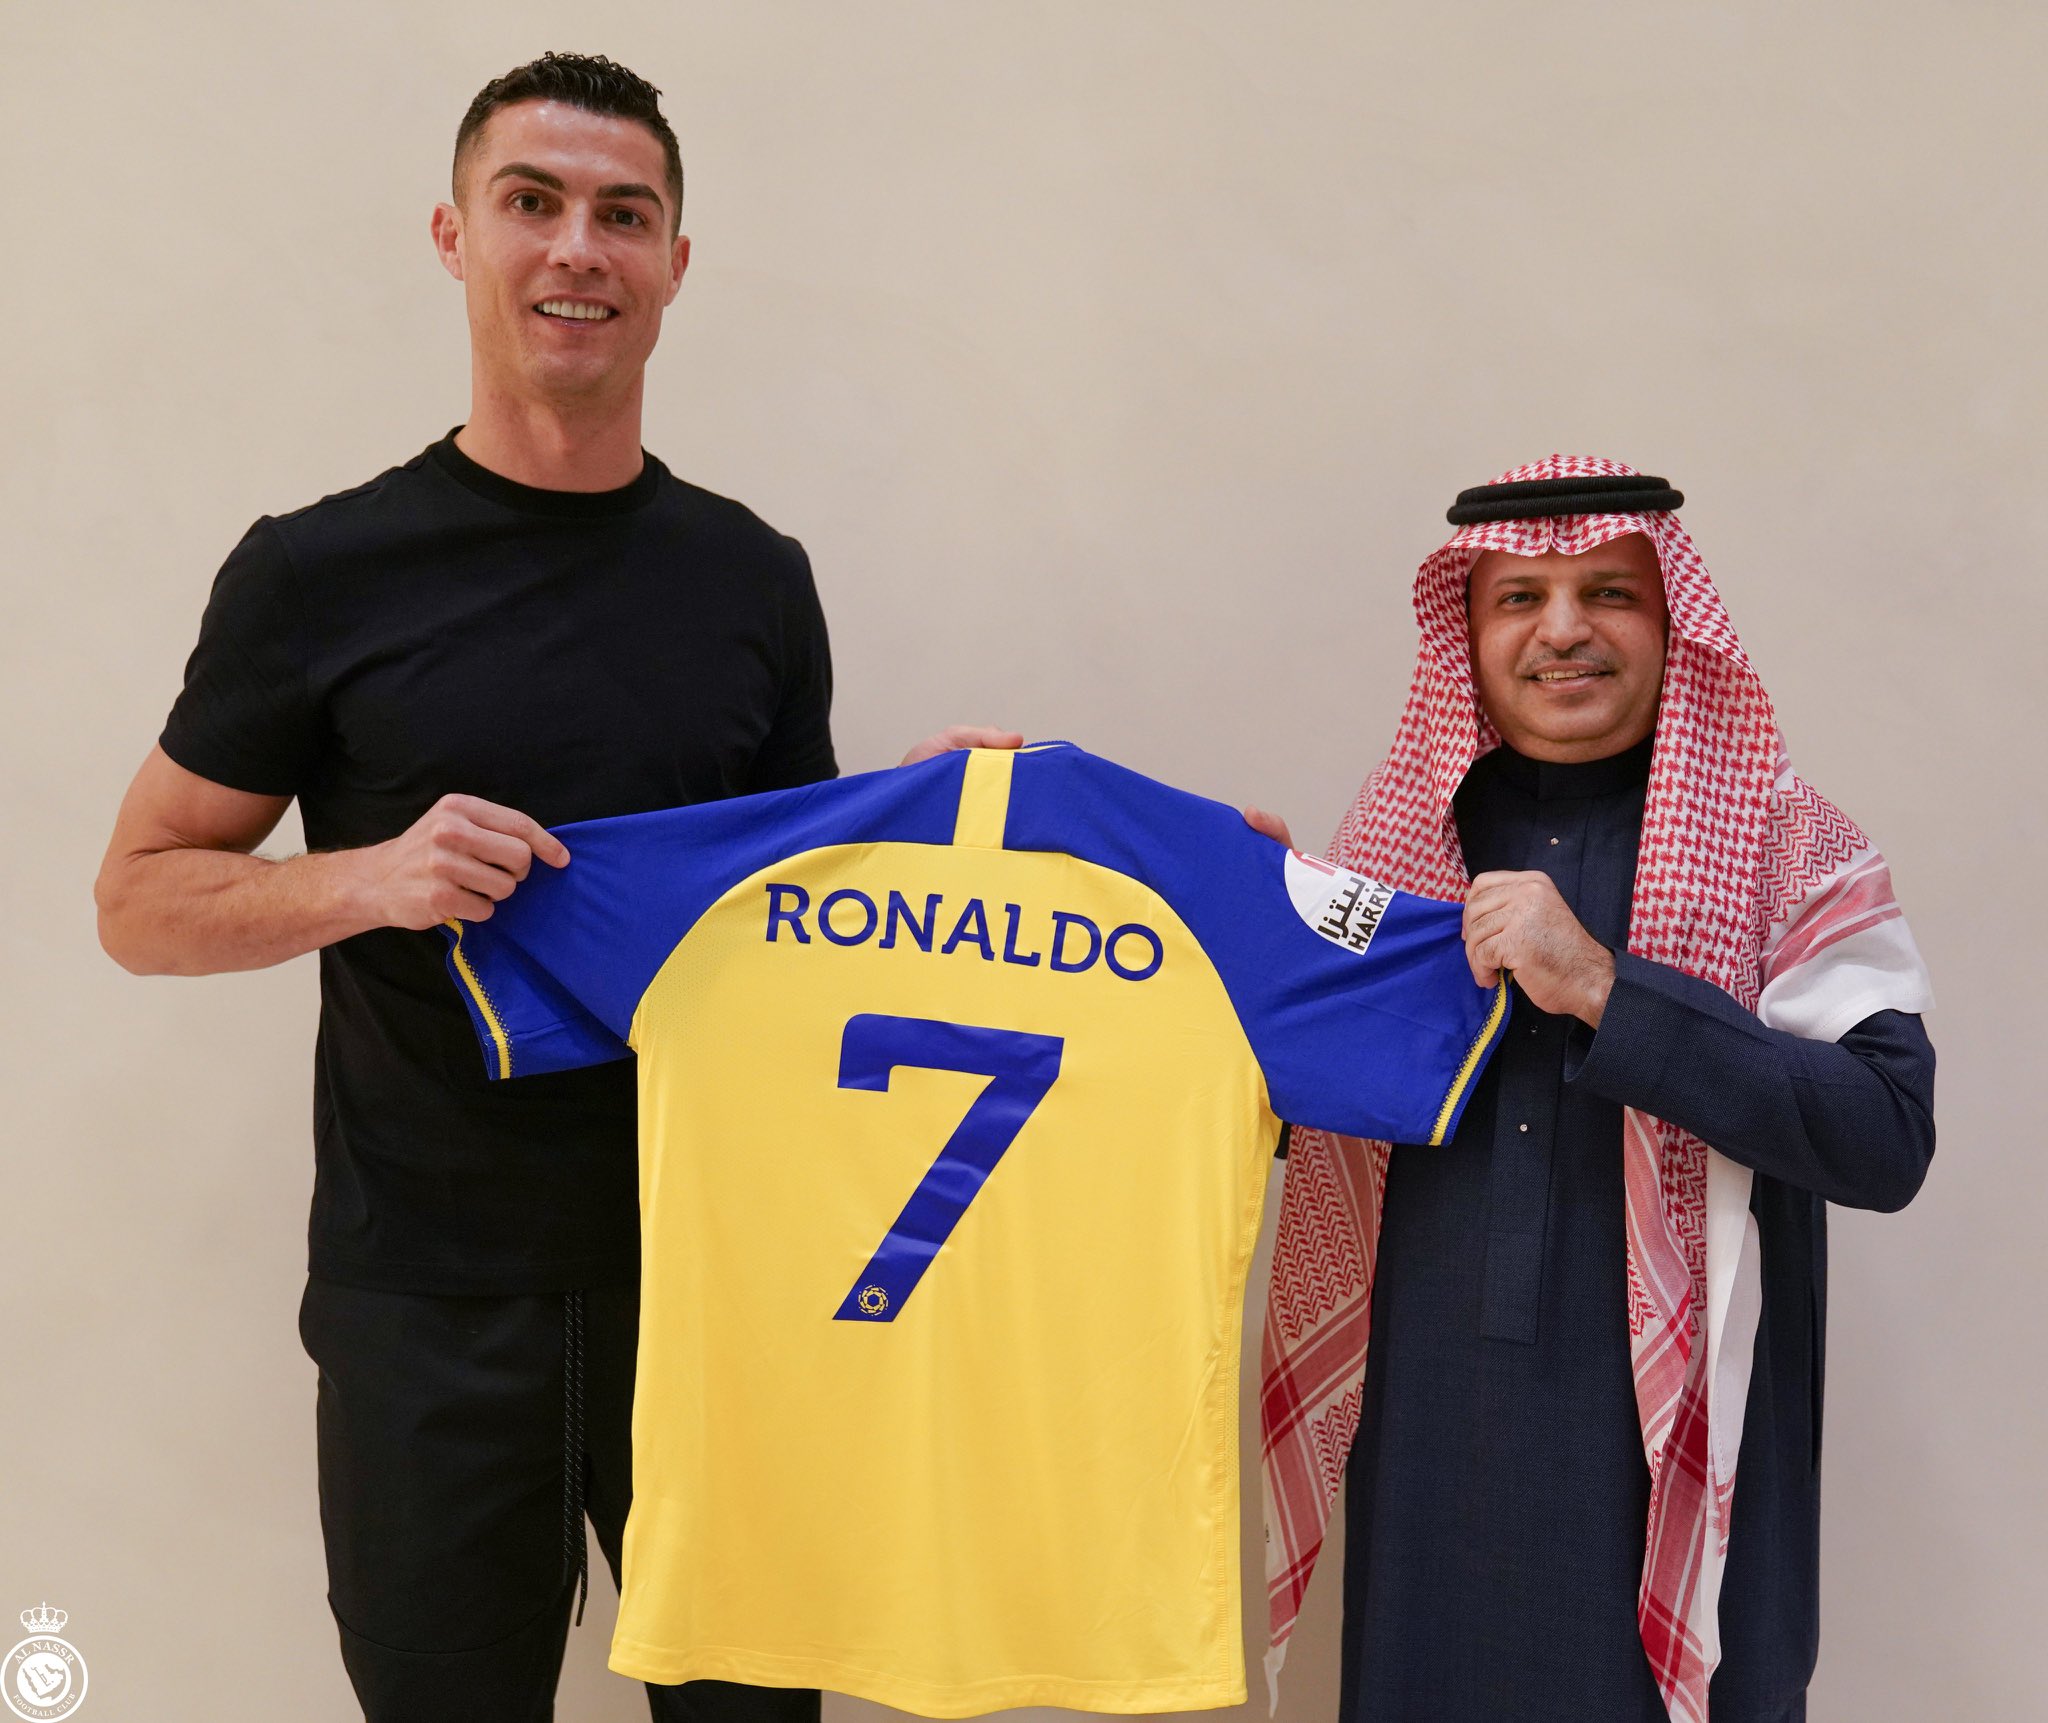 Fabrizio Romano on Twitter: "🚨 OFFICIAL: Cristiano Ronaldo joins Al Nassr,  here we go! Contract valid until 2025 🇵🇹🇸🇦 #Ronaldo  https://t.co/HB562KnaTf" / Twitter